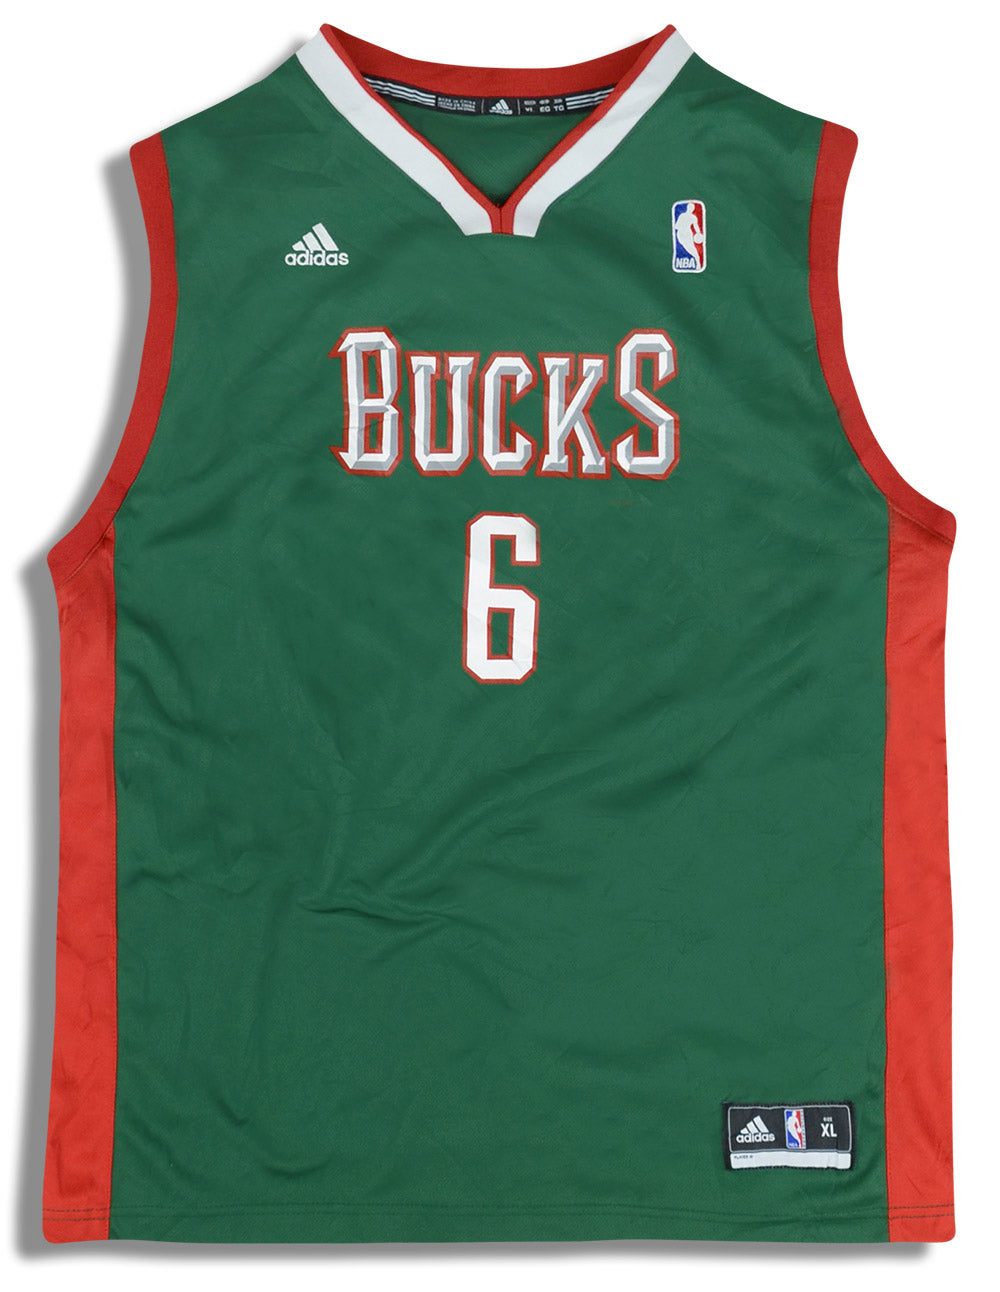 giannis jersey front